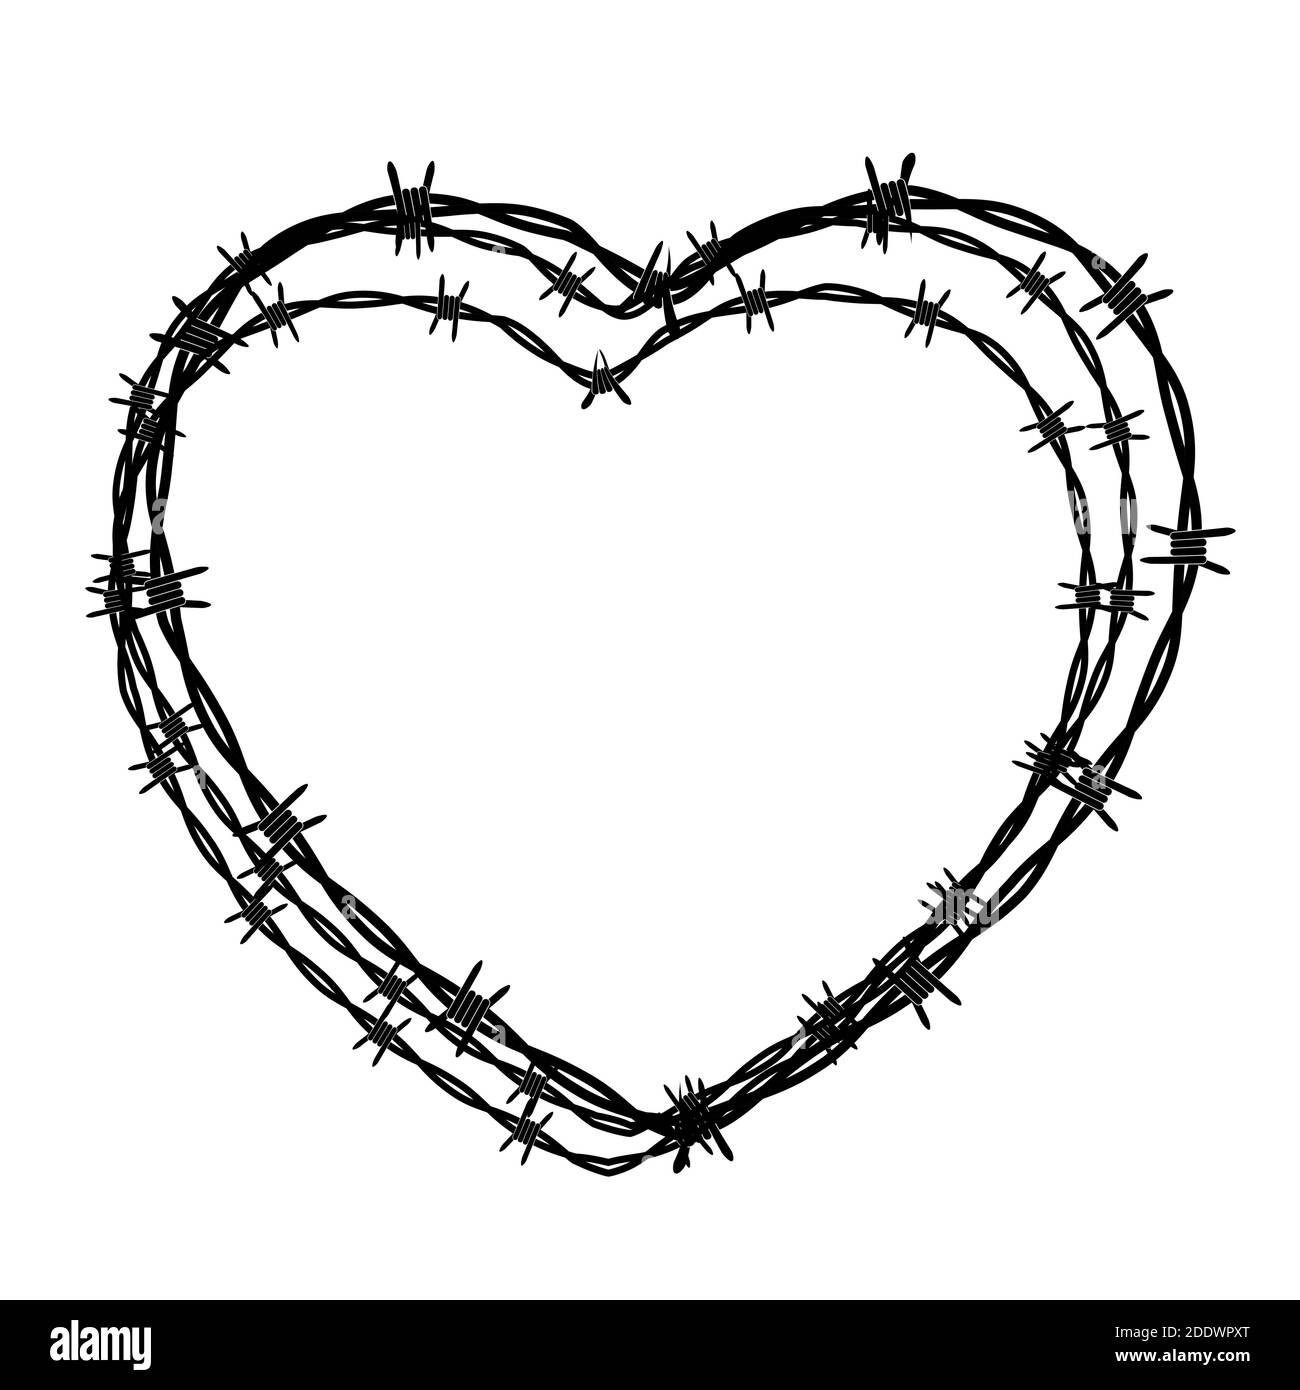 Heart Shaped conclusion symbol, sign. Barbed wire isolated on white background. Vector Illustration EPS10 Stock Vector